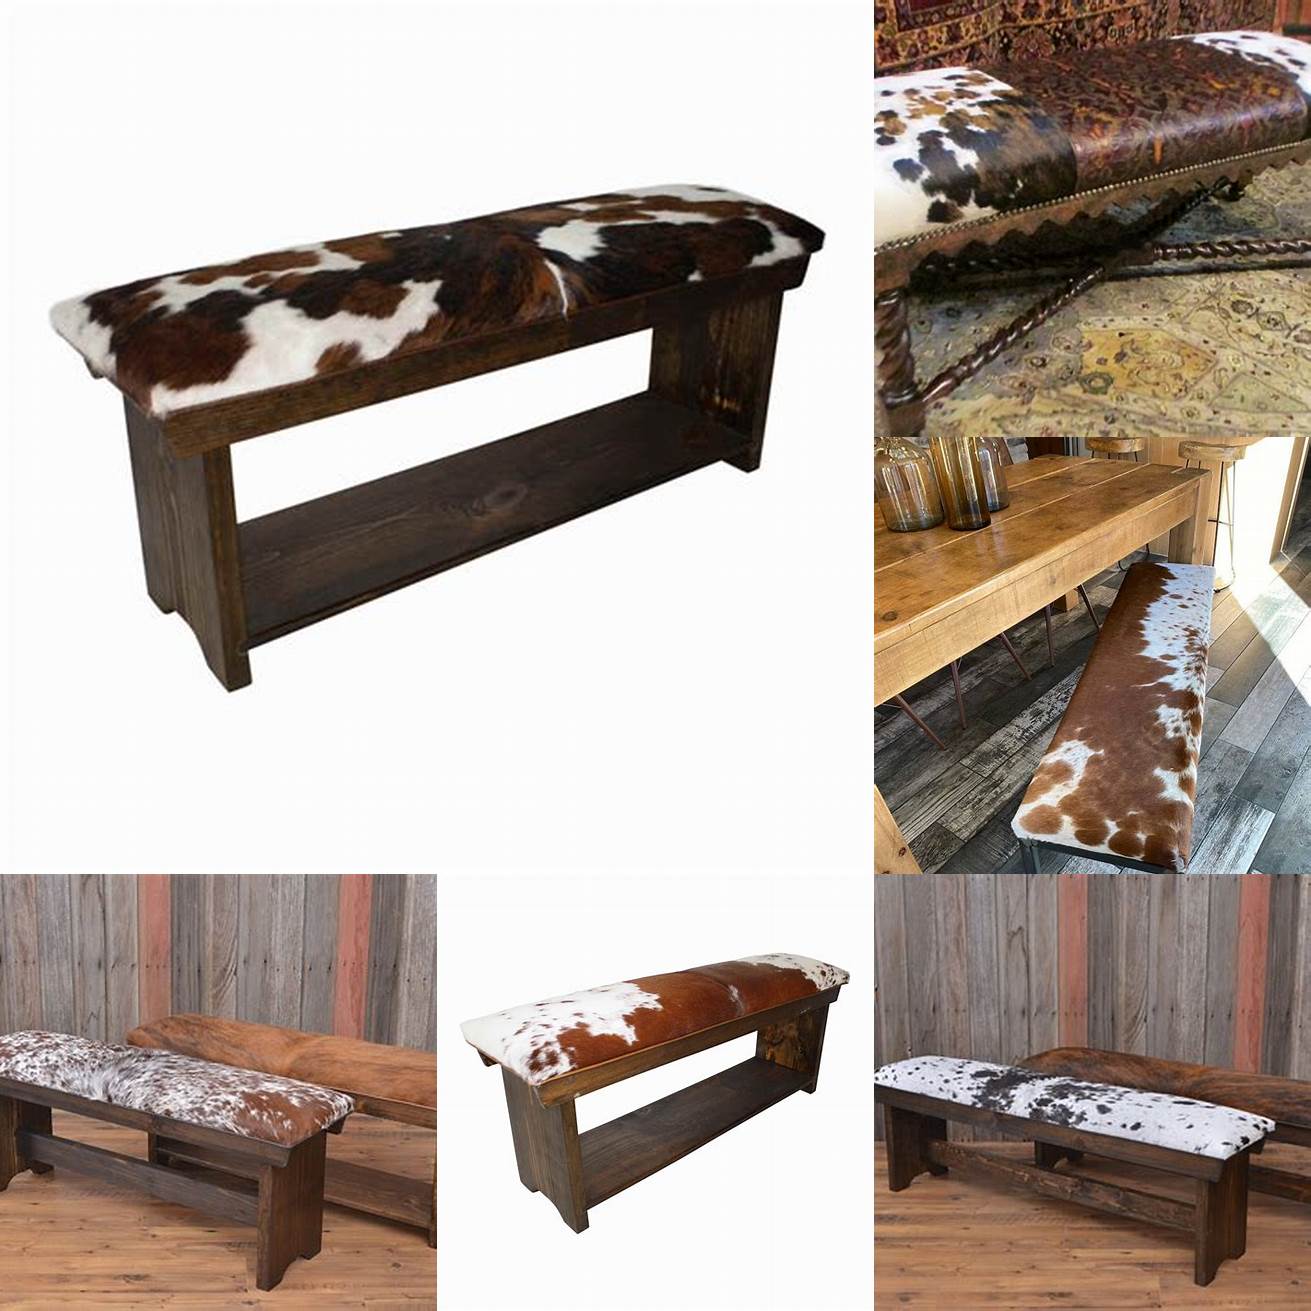 Cowhide benches are a stylish addition to any entryway or bedroom They can be used to store shoes or as a place to sit while getting dressed